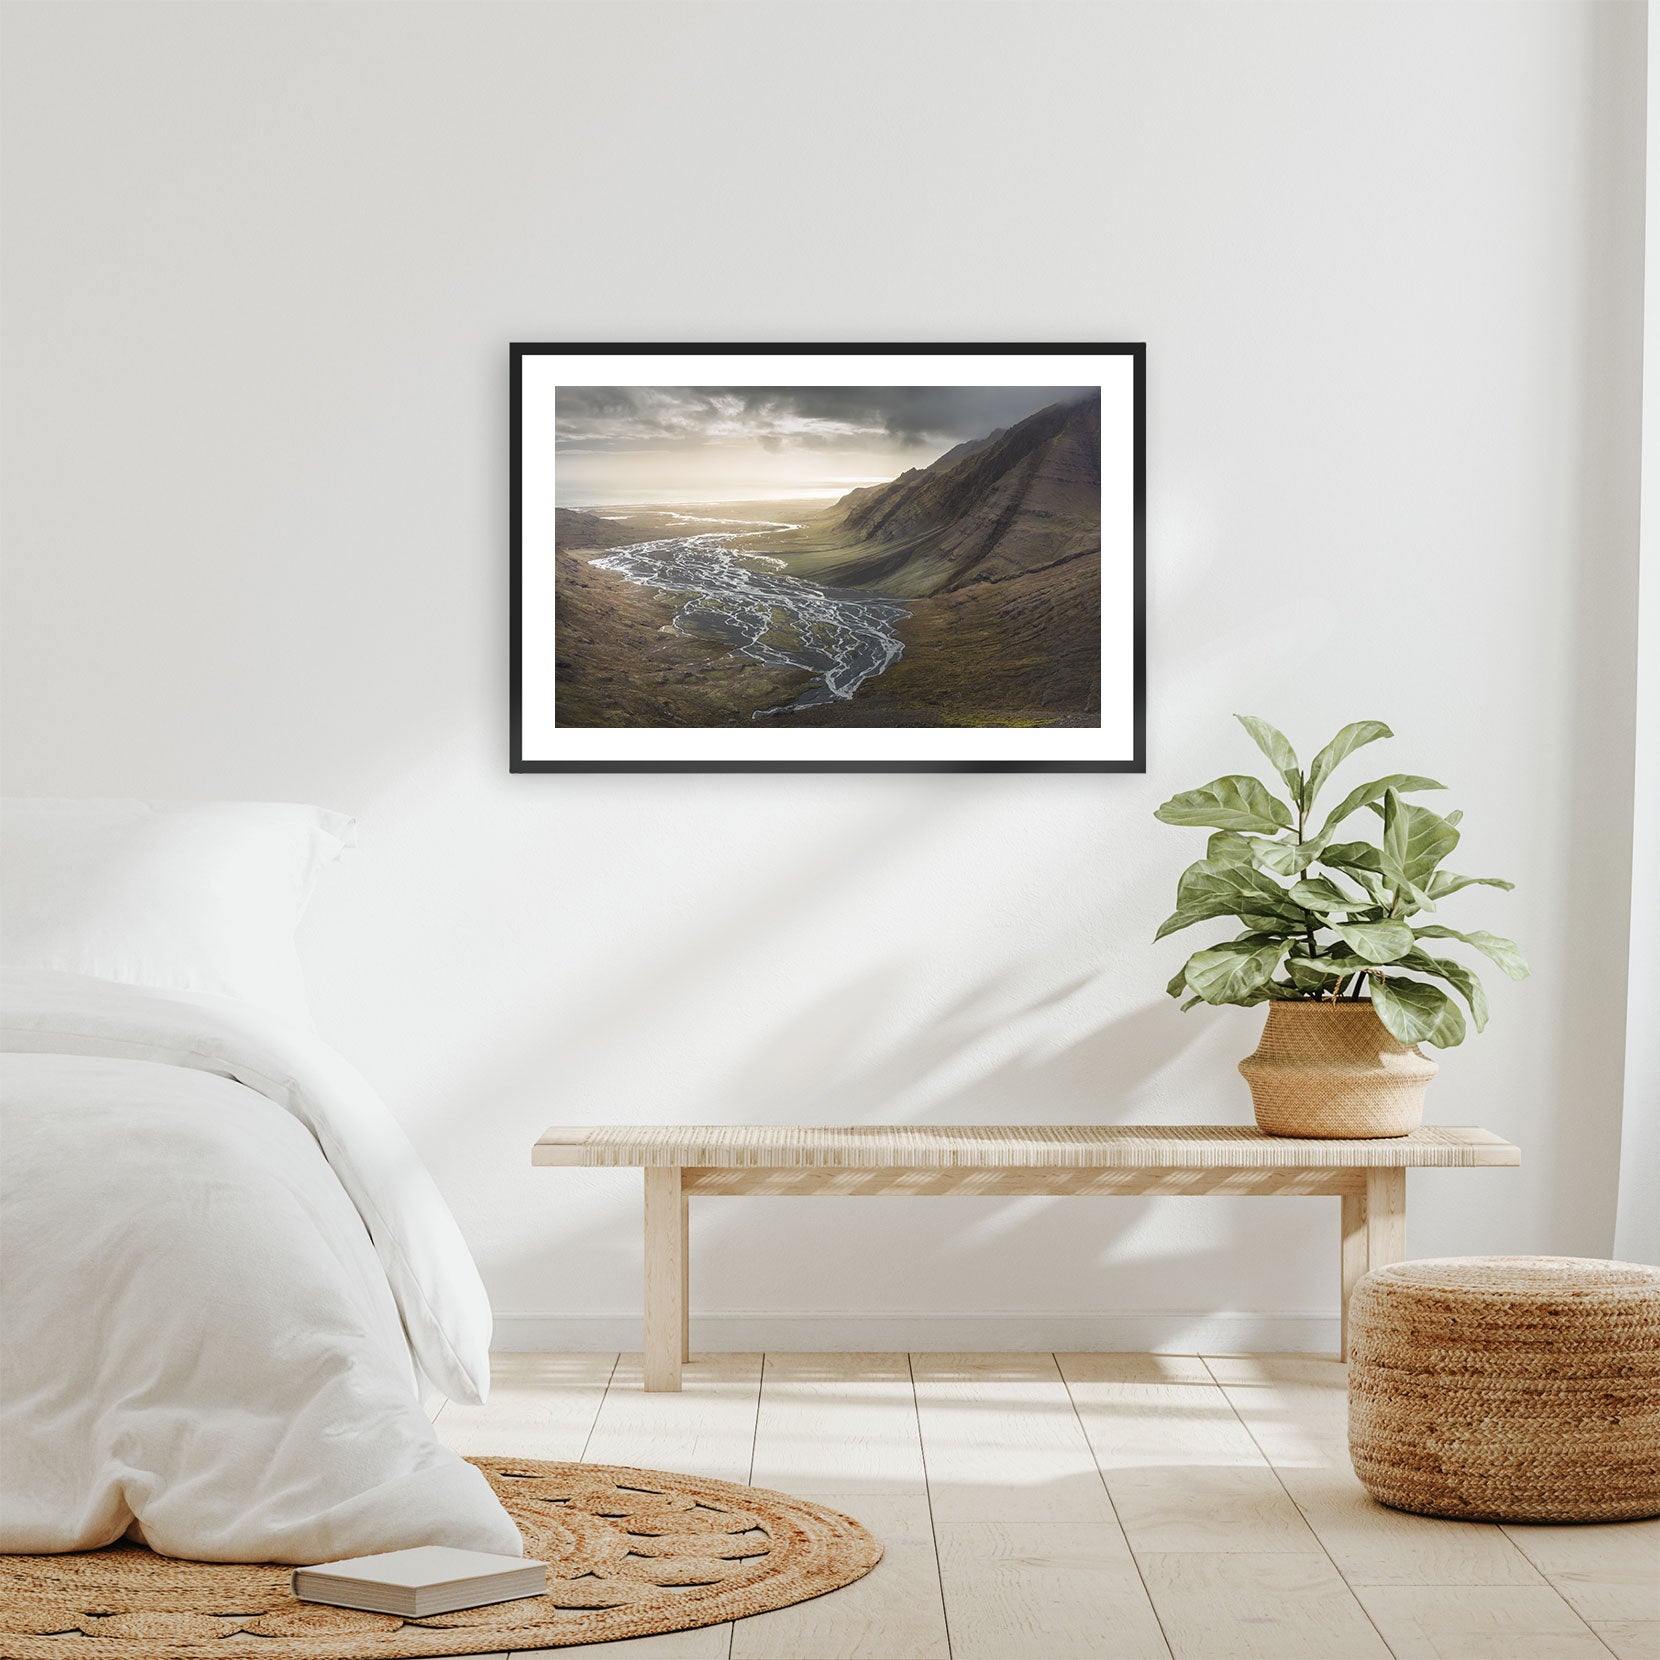 A framed print of a valley in the south of Iceland